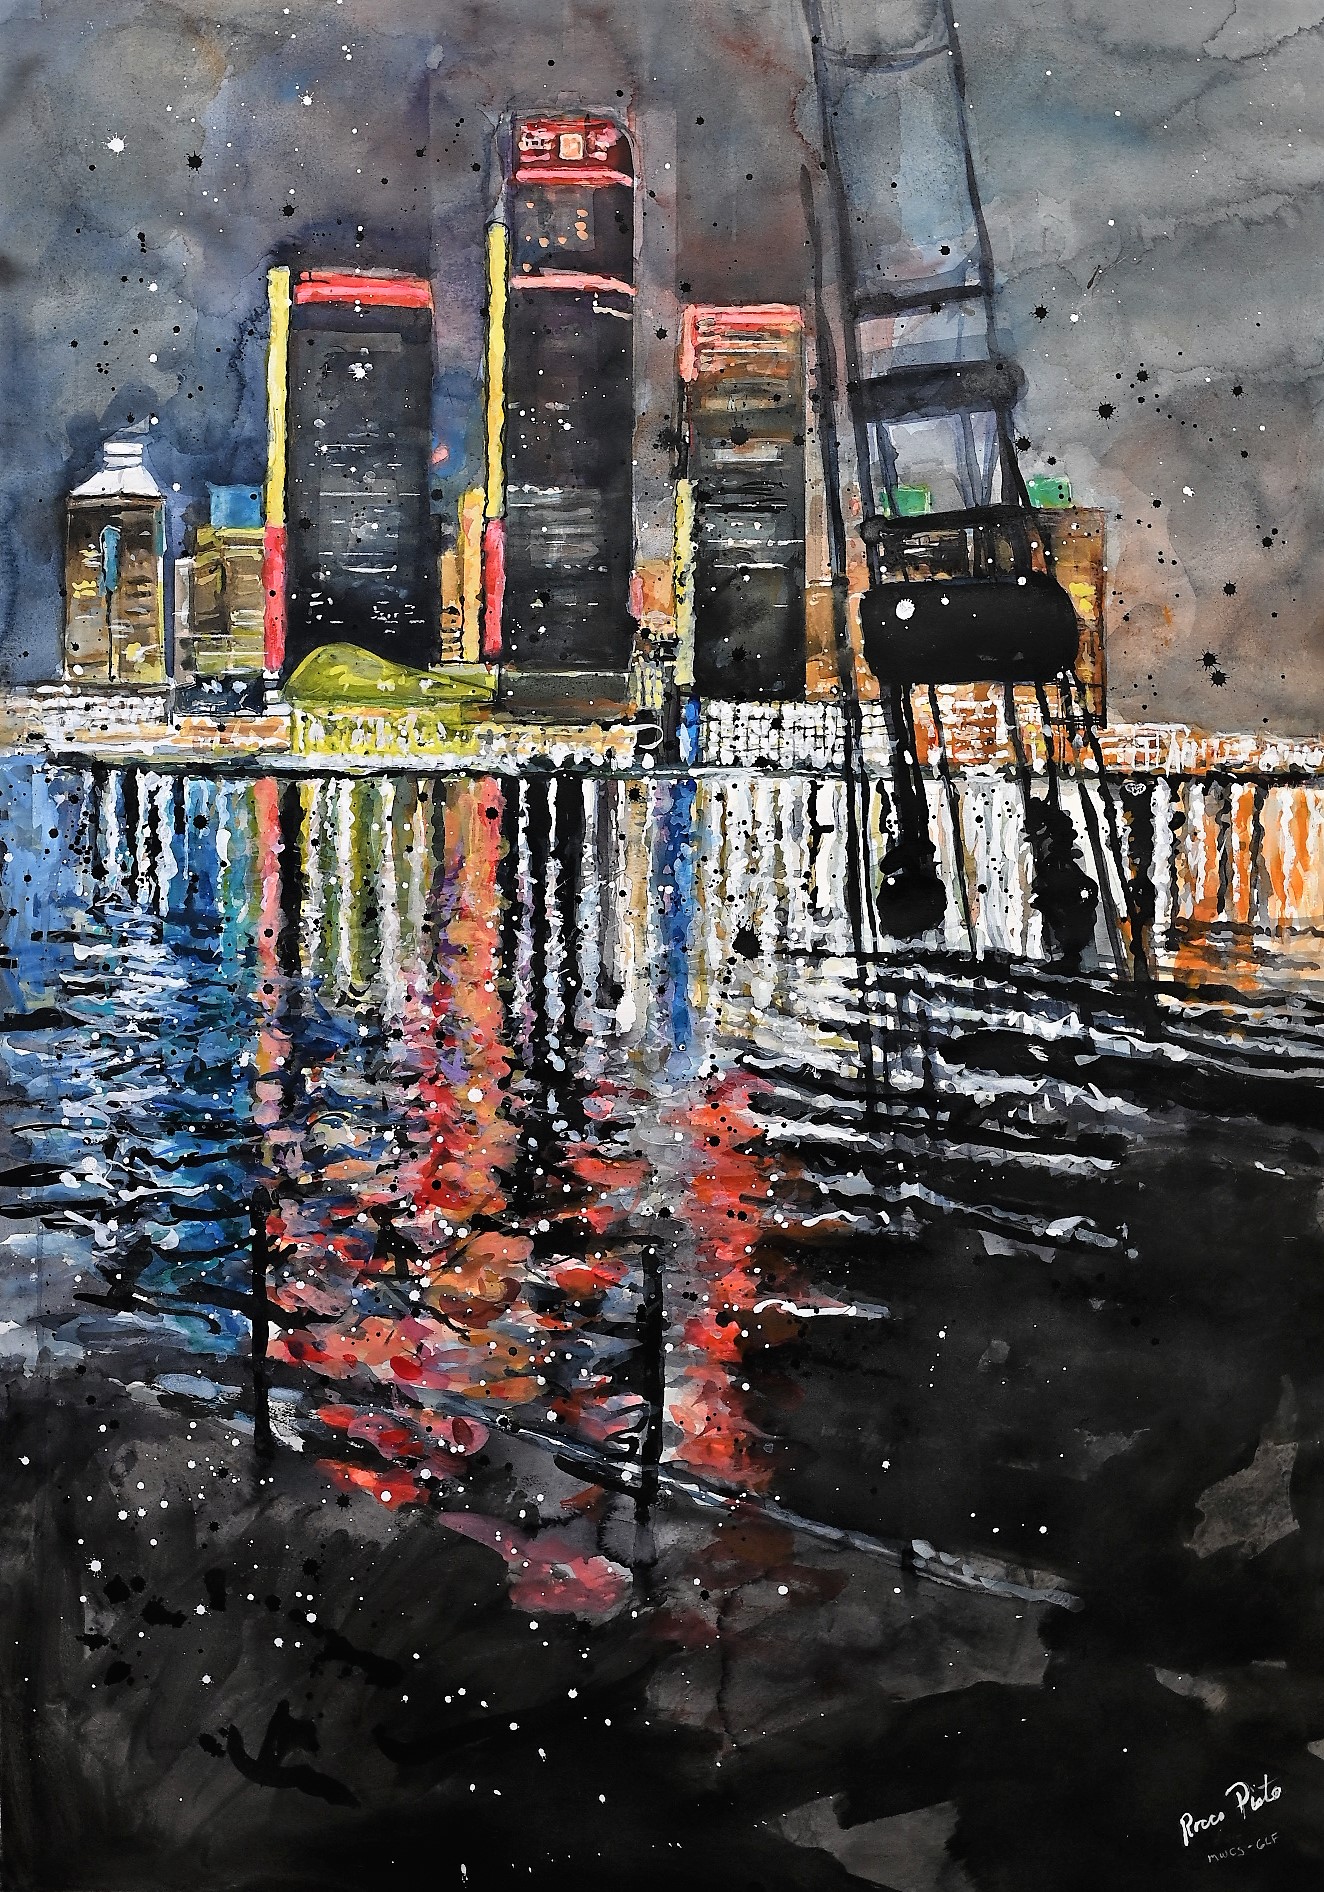 watercolor painting - Detroit RenCen at Night by Rocco Pisto